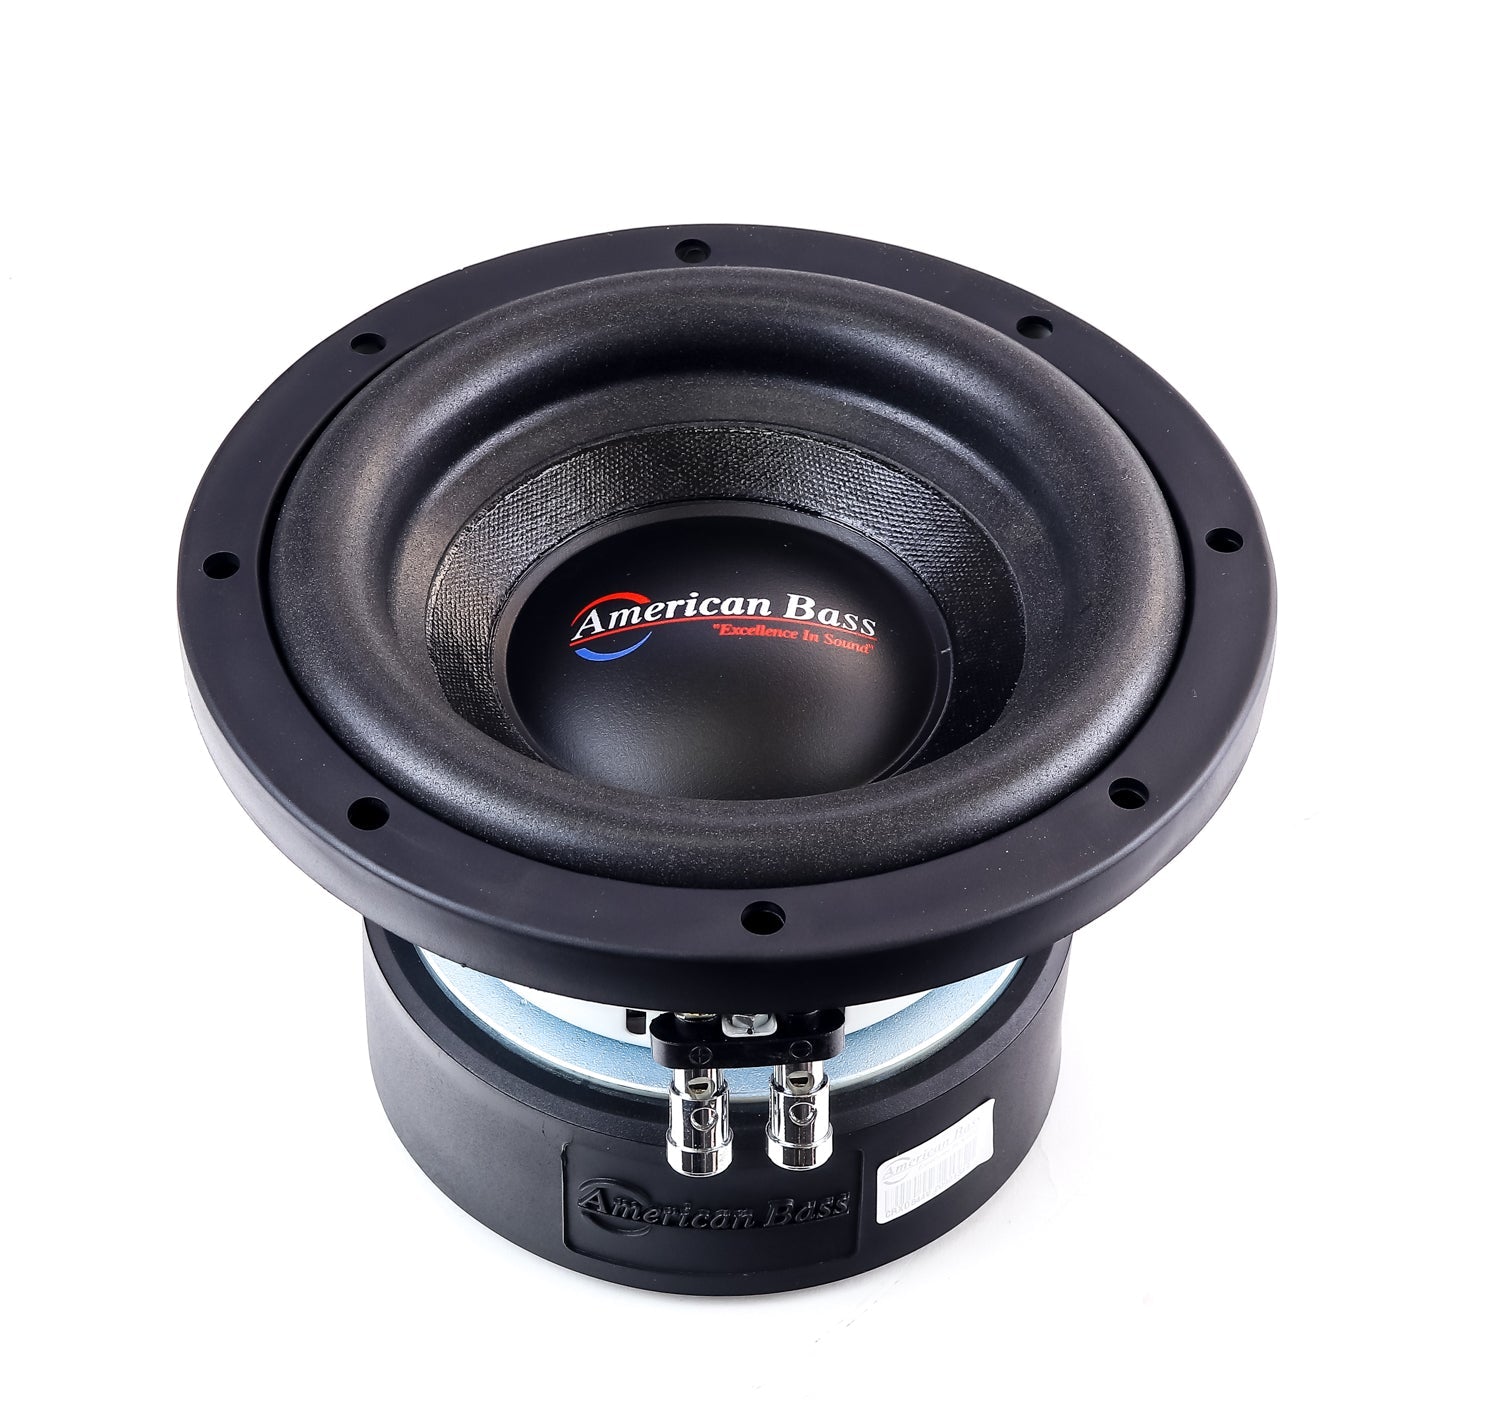 XD 8" Subwoofer - American Bass Audio